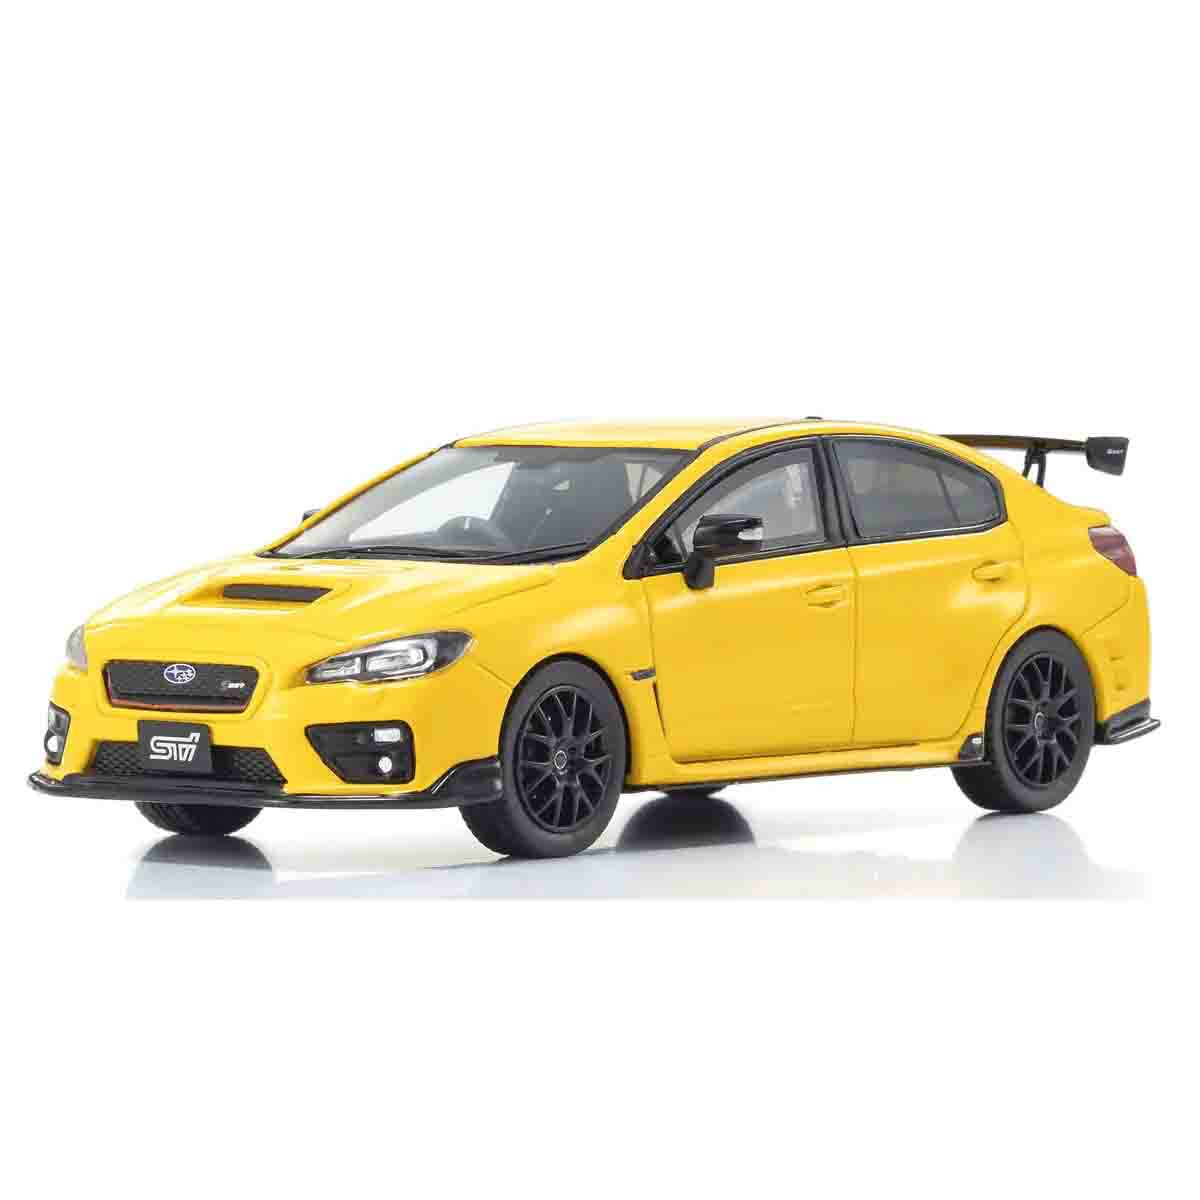 S207 NBR Challenge Package Yellow Edition - 1:43 Scale Resin Model Car